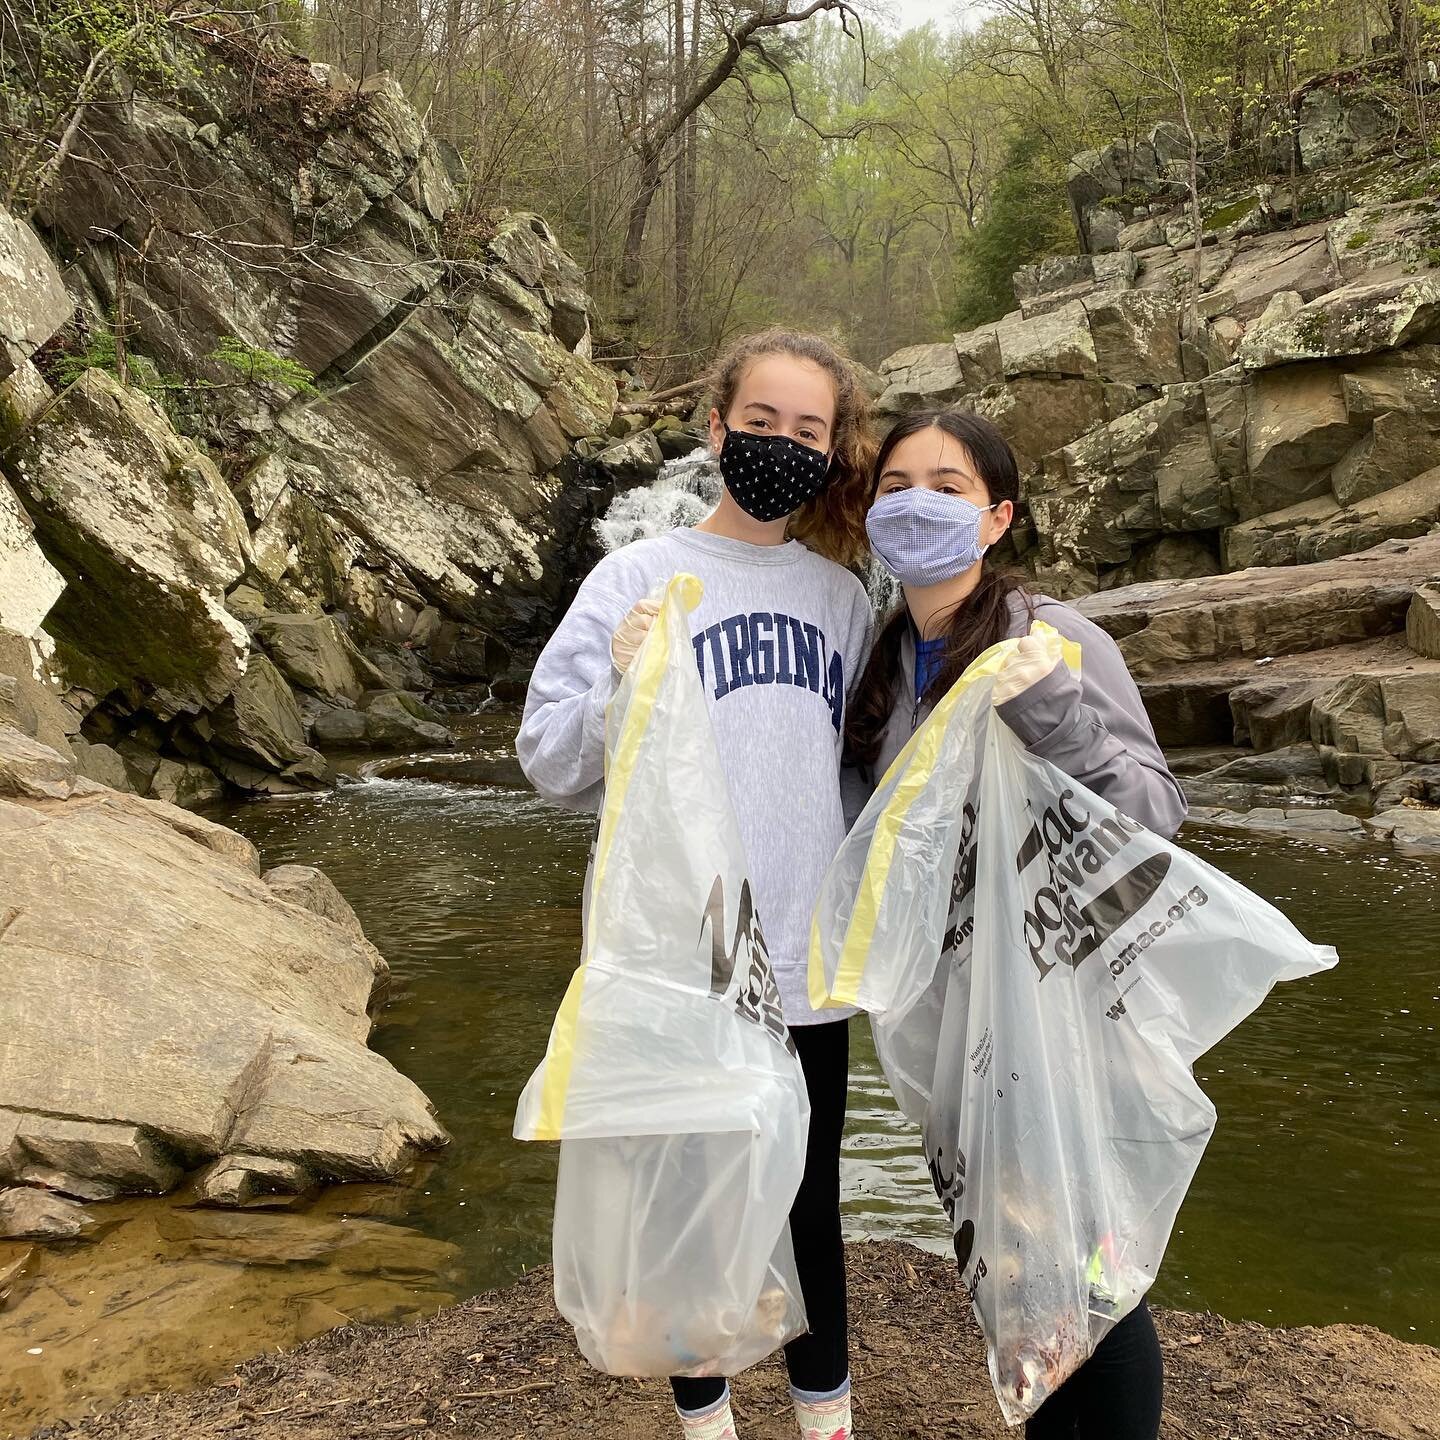 Happy #NationalVolunteerWeek! Oh my goodness, we love 😍🥰 our volunteers for so many reasons. Yes, they help us pick up trash, collect native seeds, plant trees, and advocate for #cleanwater protections on the local, state, and federal levels (last 